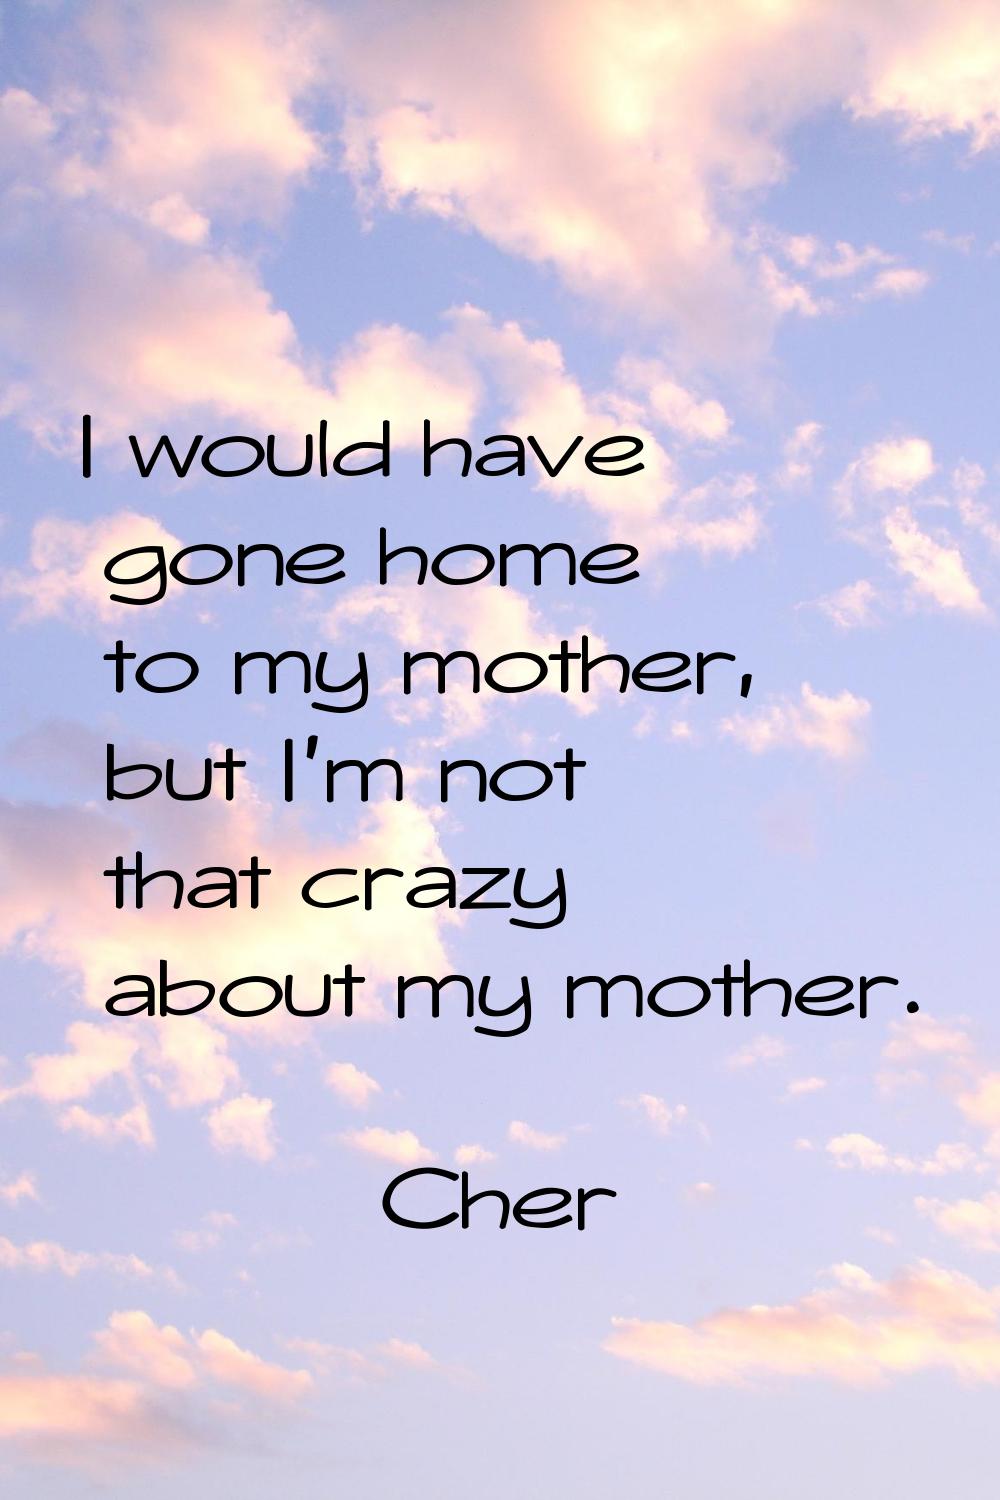 I would have gone home to my mother, but I'm not that crazy about my mother.